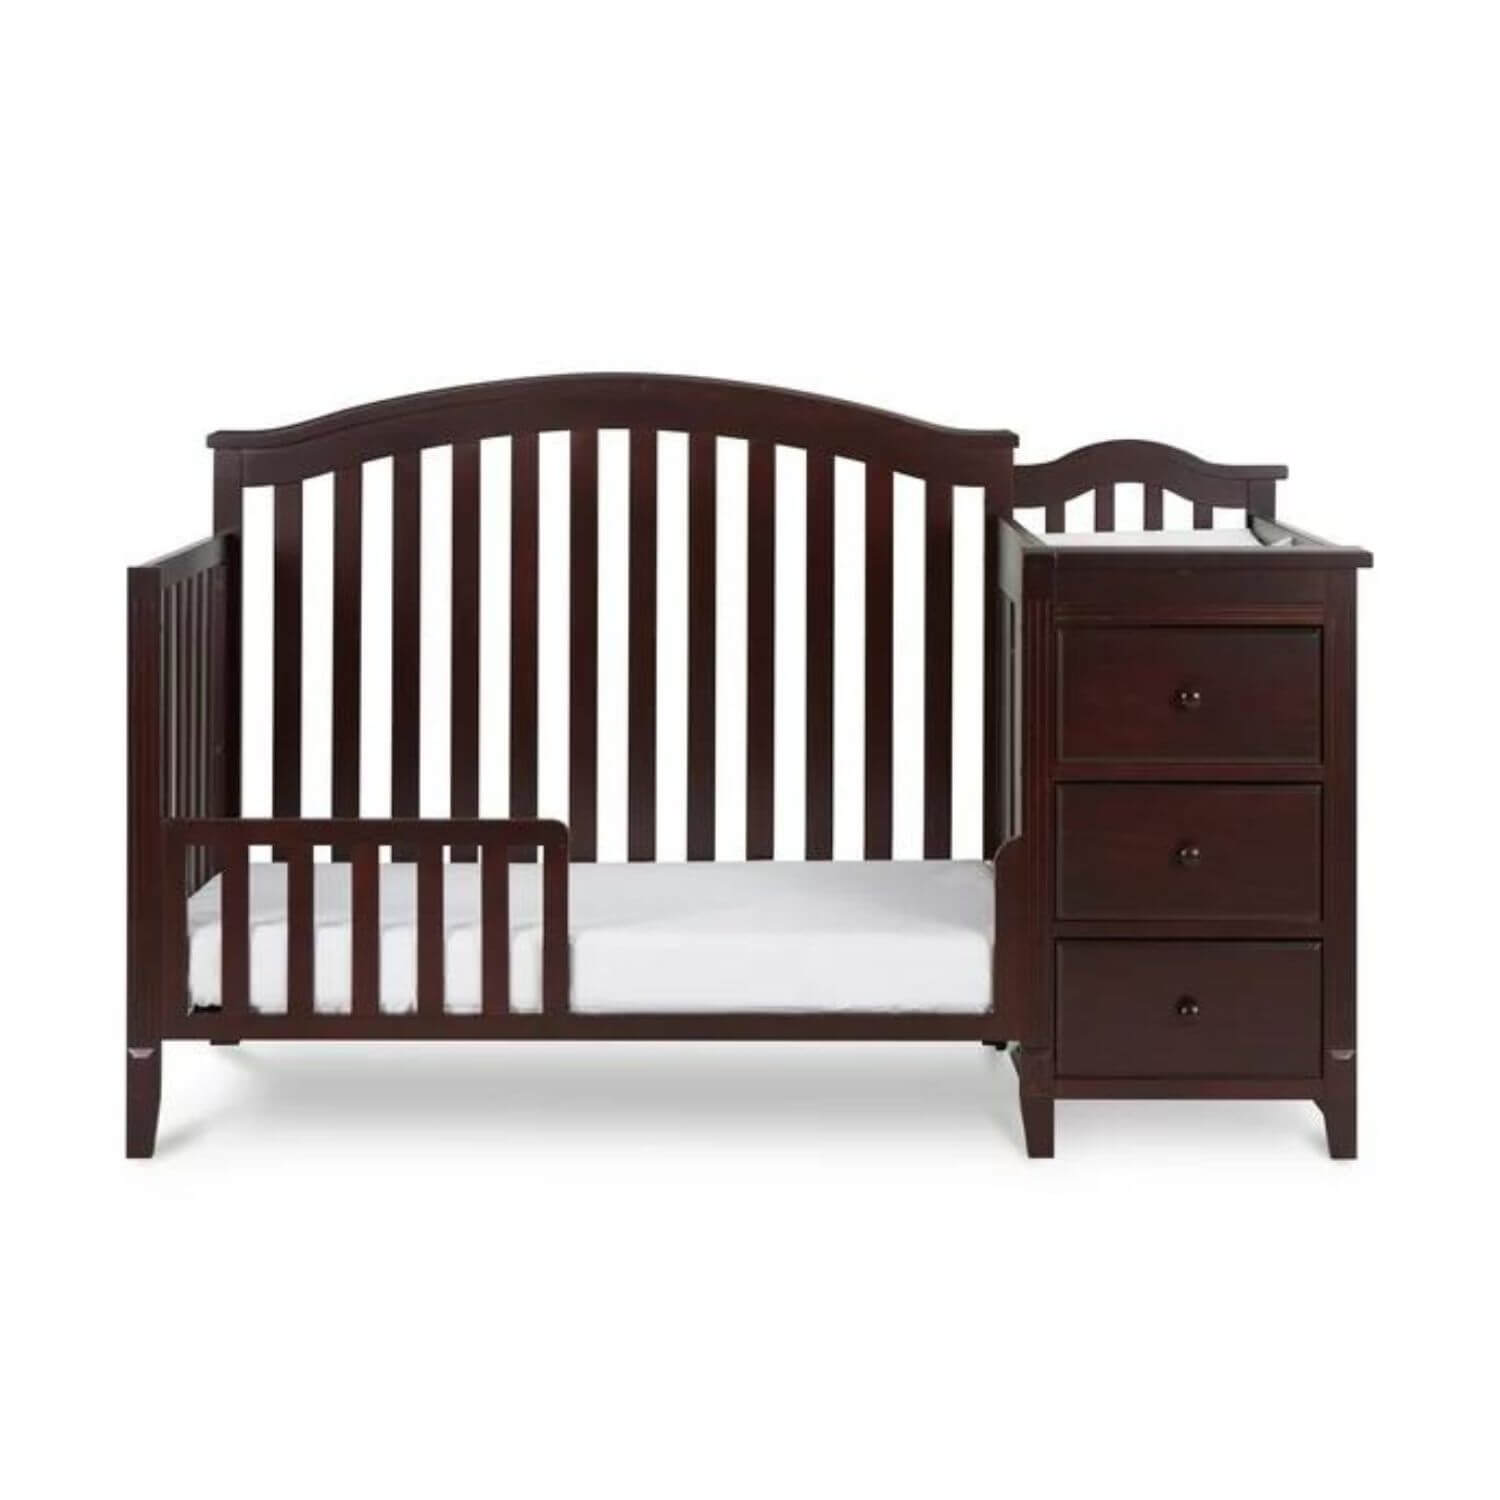 AFG Kali II 4-in-1 Convertible Crib and Changer Espresso